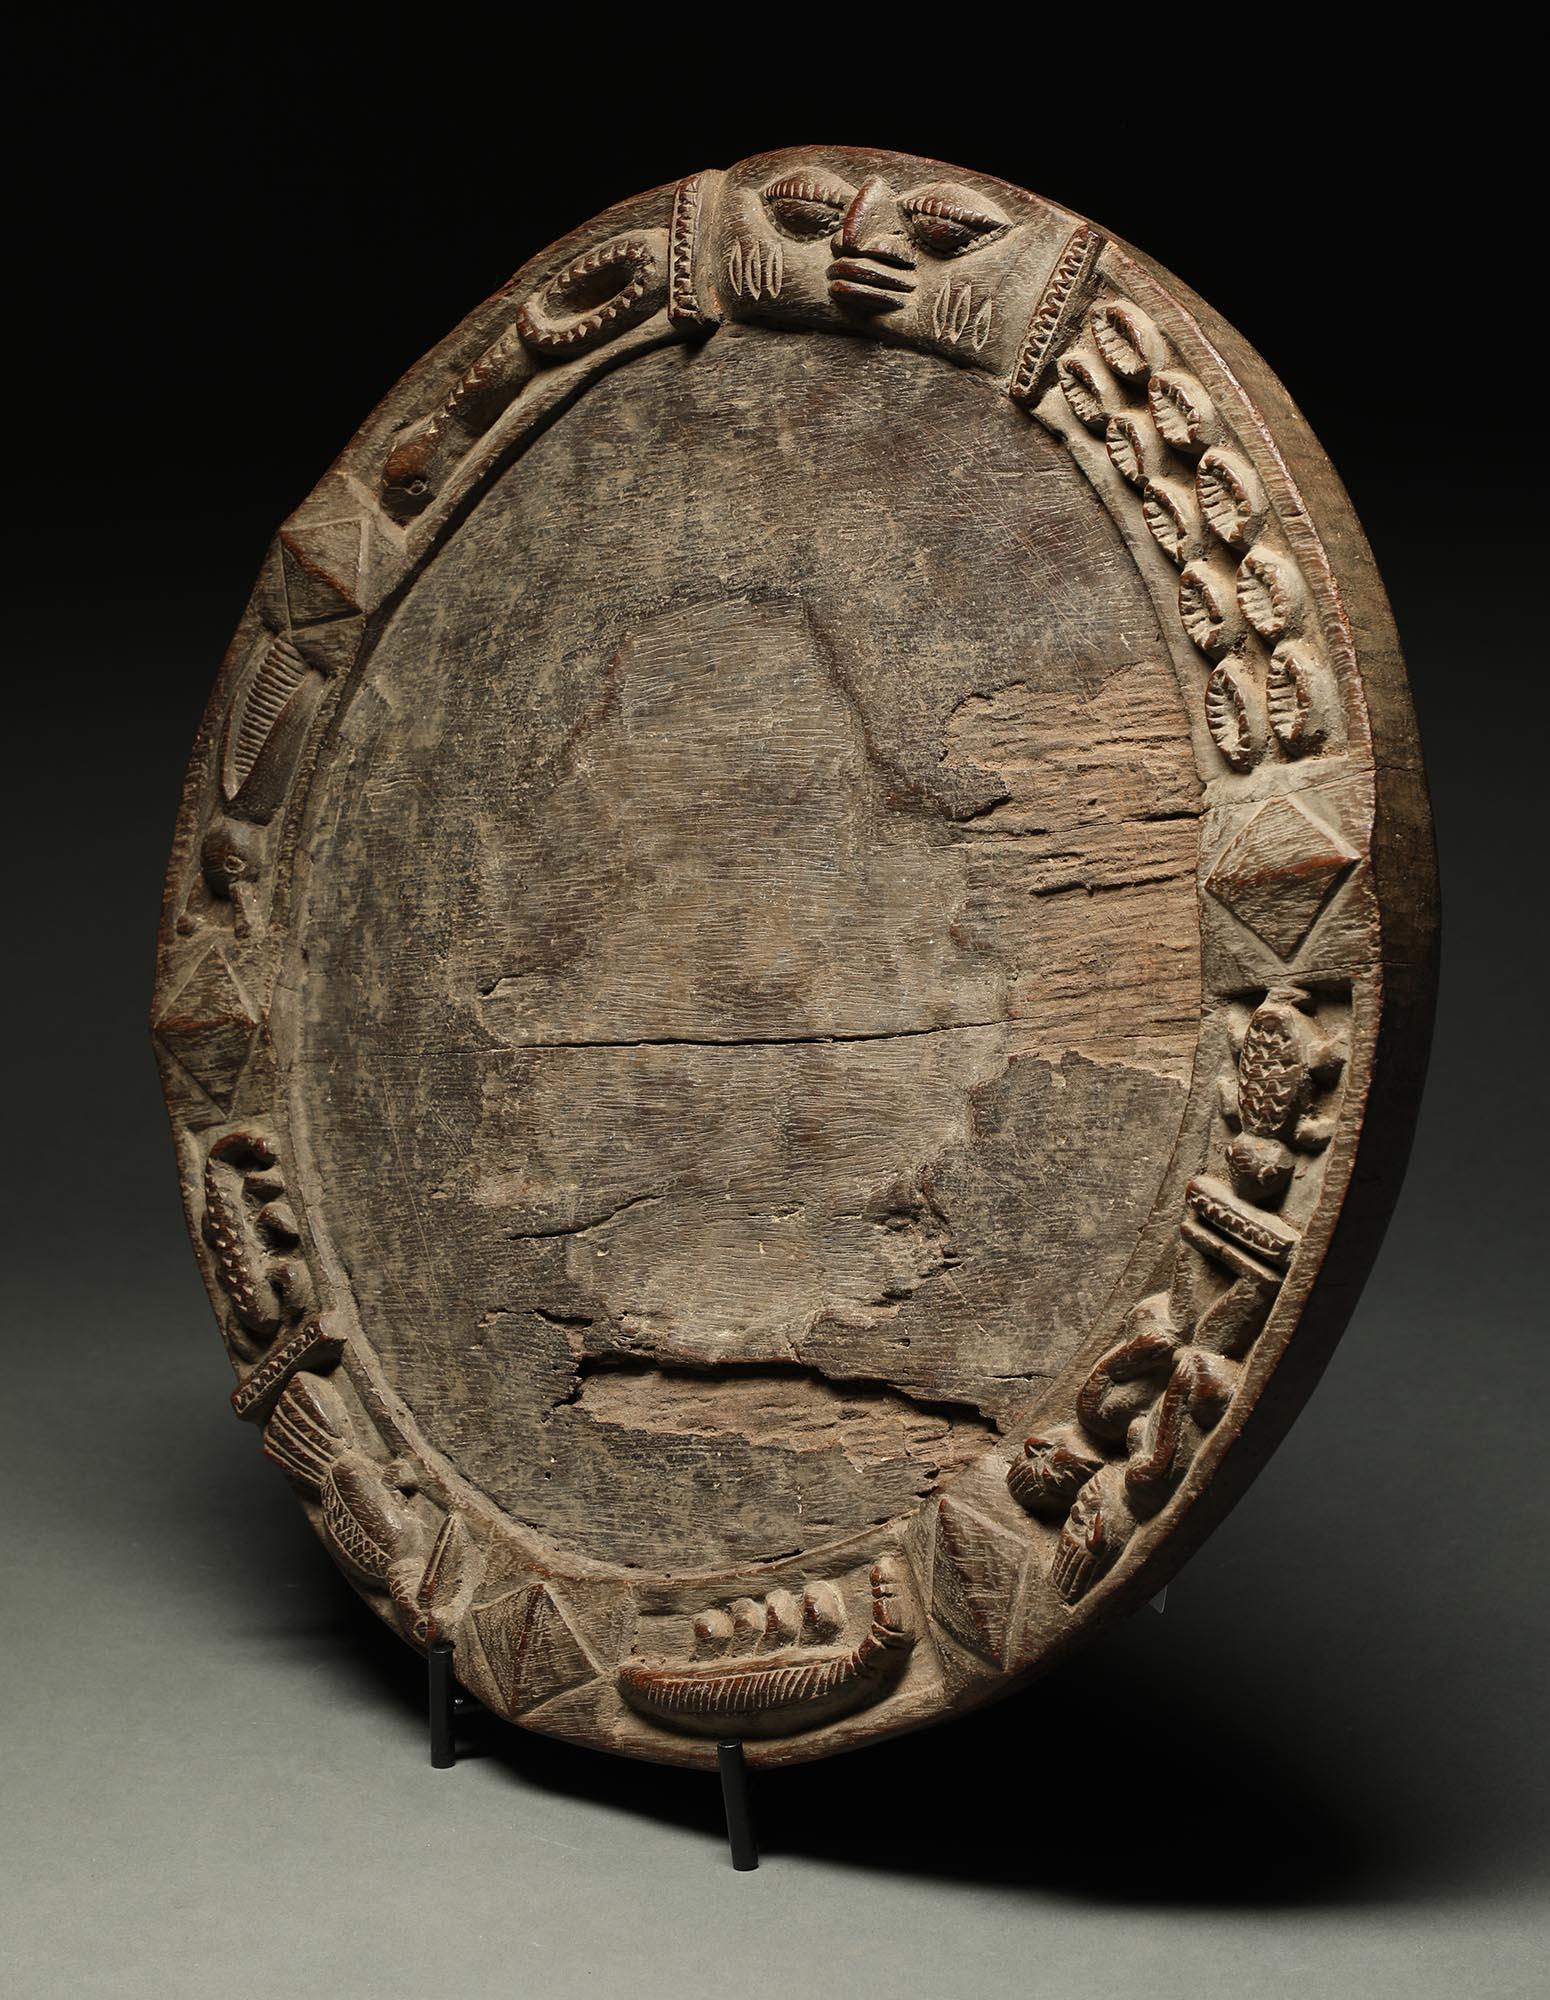 Very early large Yoruba divination board, a classic form round board with face at top, figures, couples, snakes, cowrie shells and other items around the edge of the board. Heavy wood, early 20th century, Nigeria. Areas of erosion and wear in center